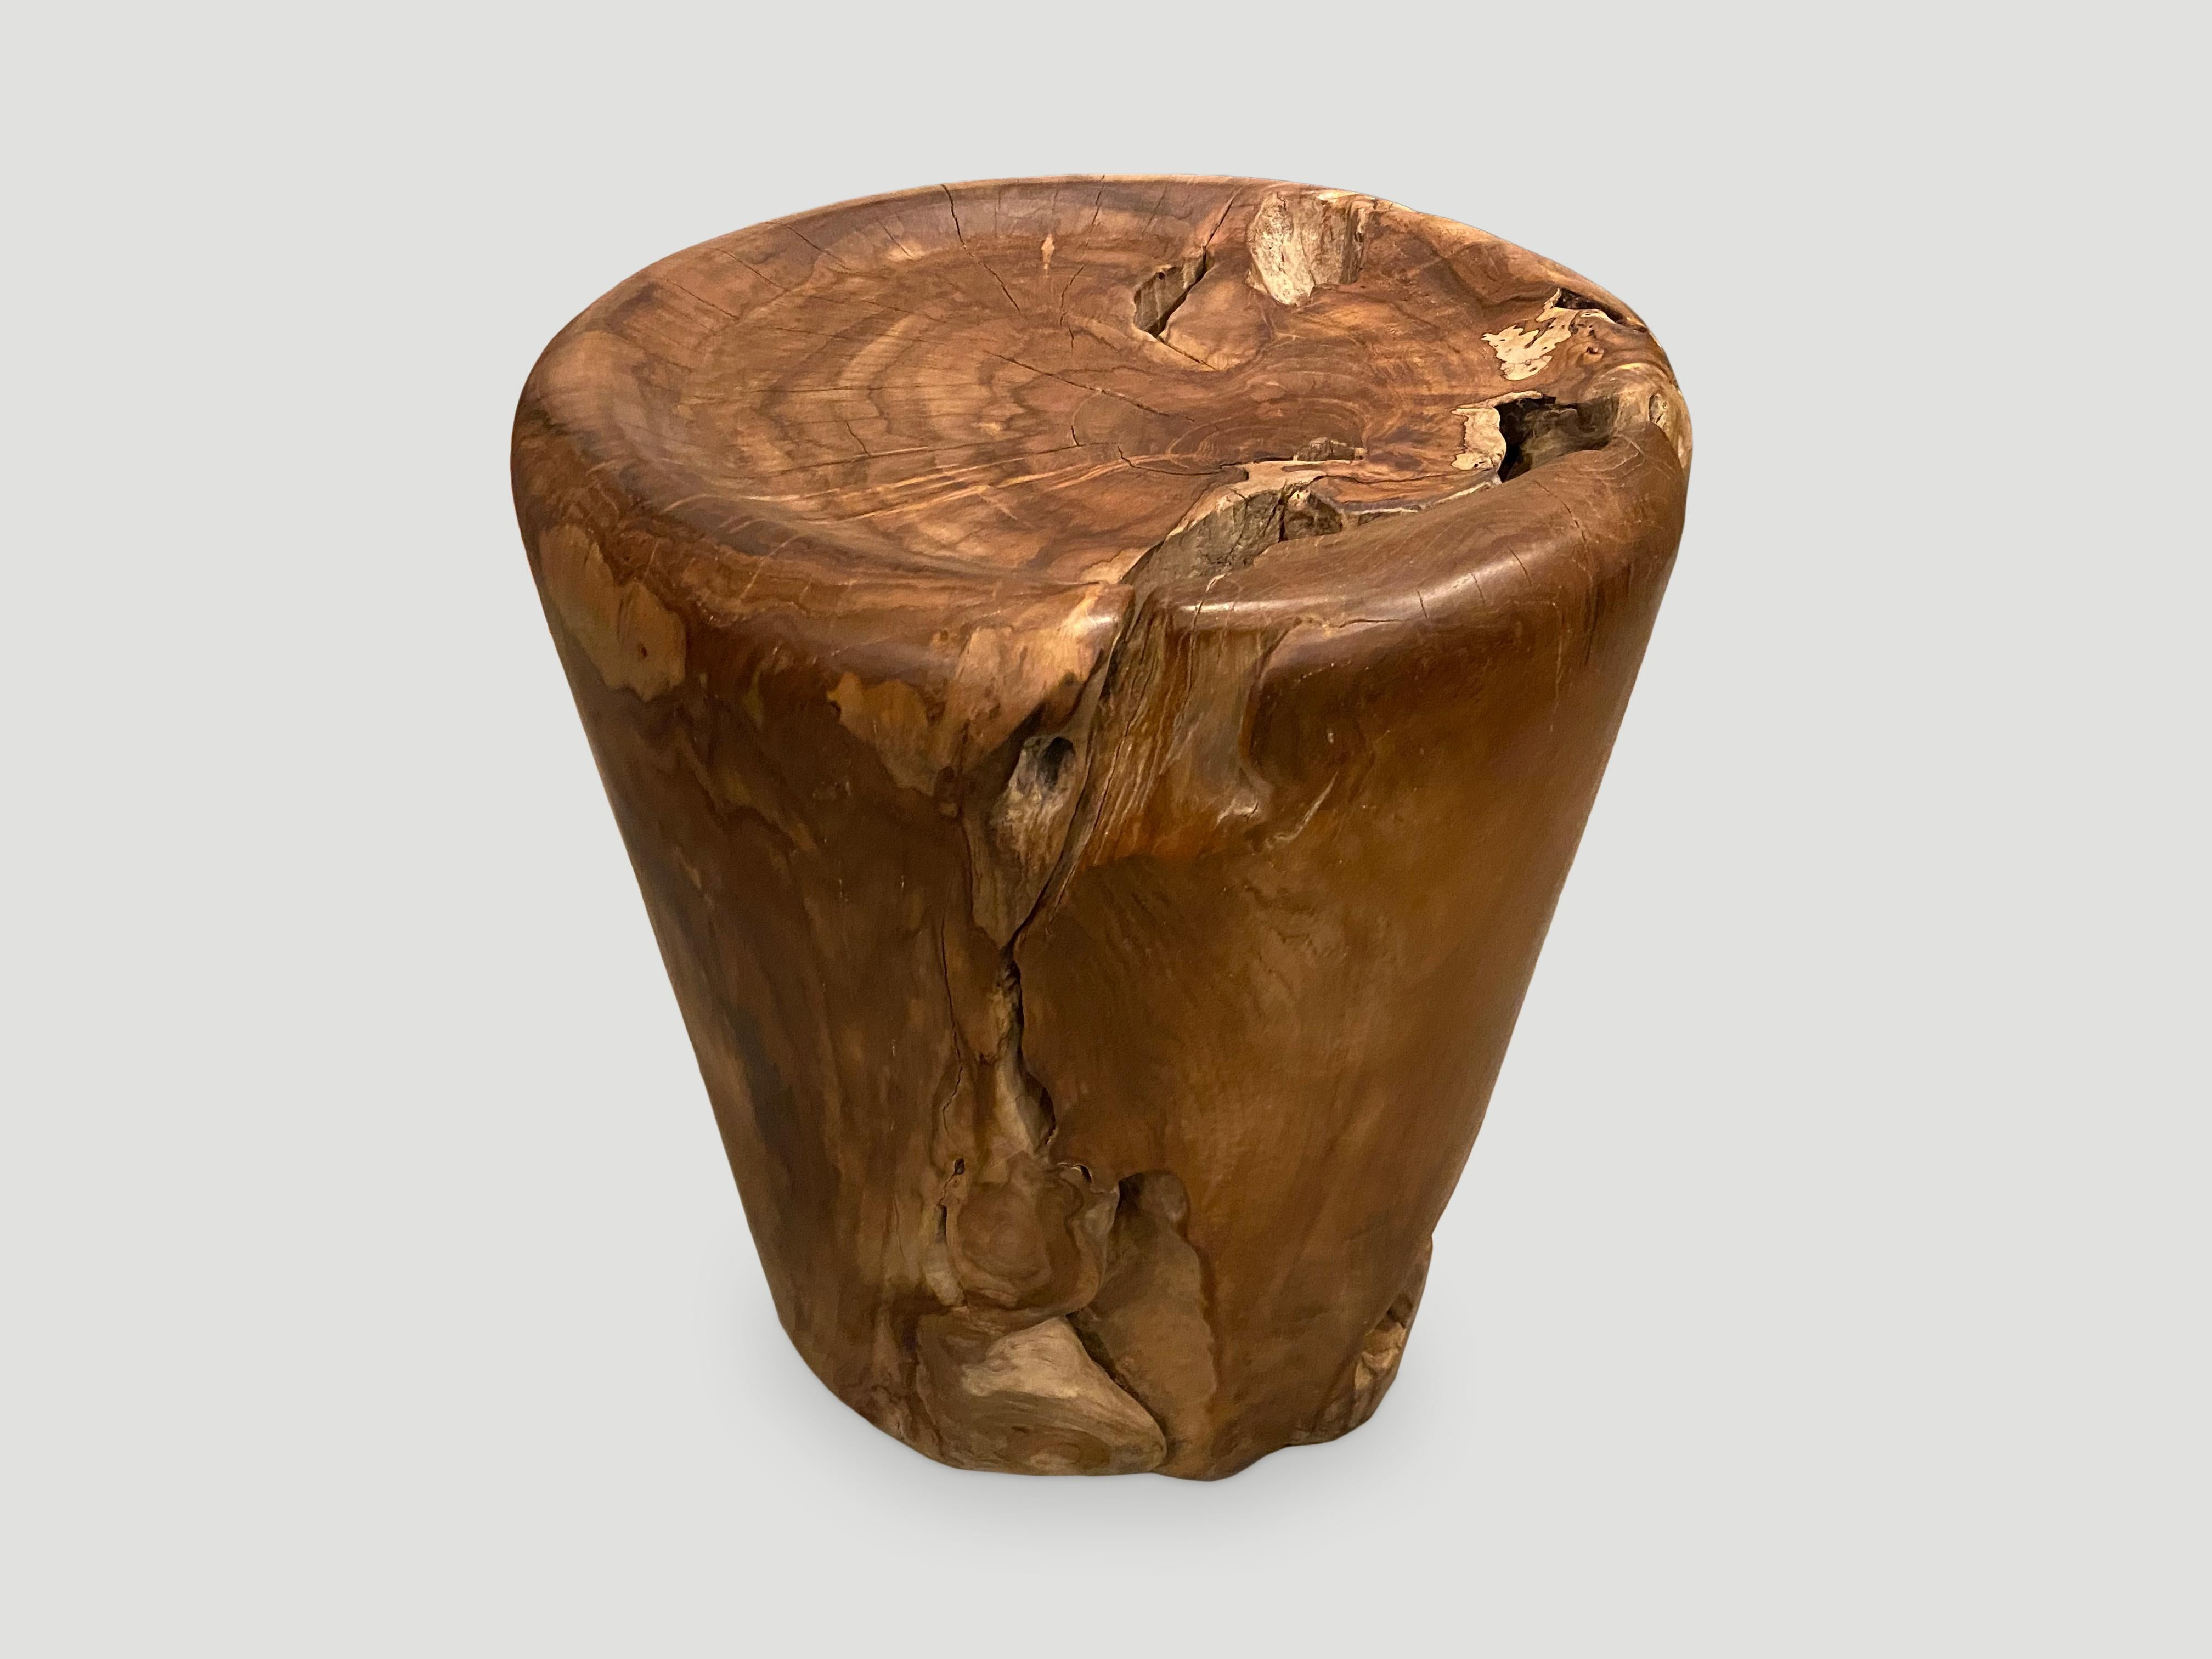 Natural organic formed reclaimed teak root side table. We hand carved the top section into a tray style and polished with a natural oil finish revealing the beautiful wood grain. There is a slight graduation from the top at 16